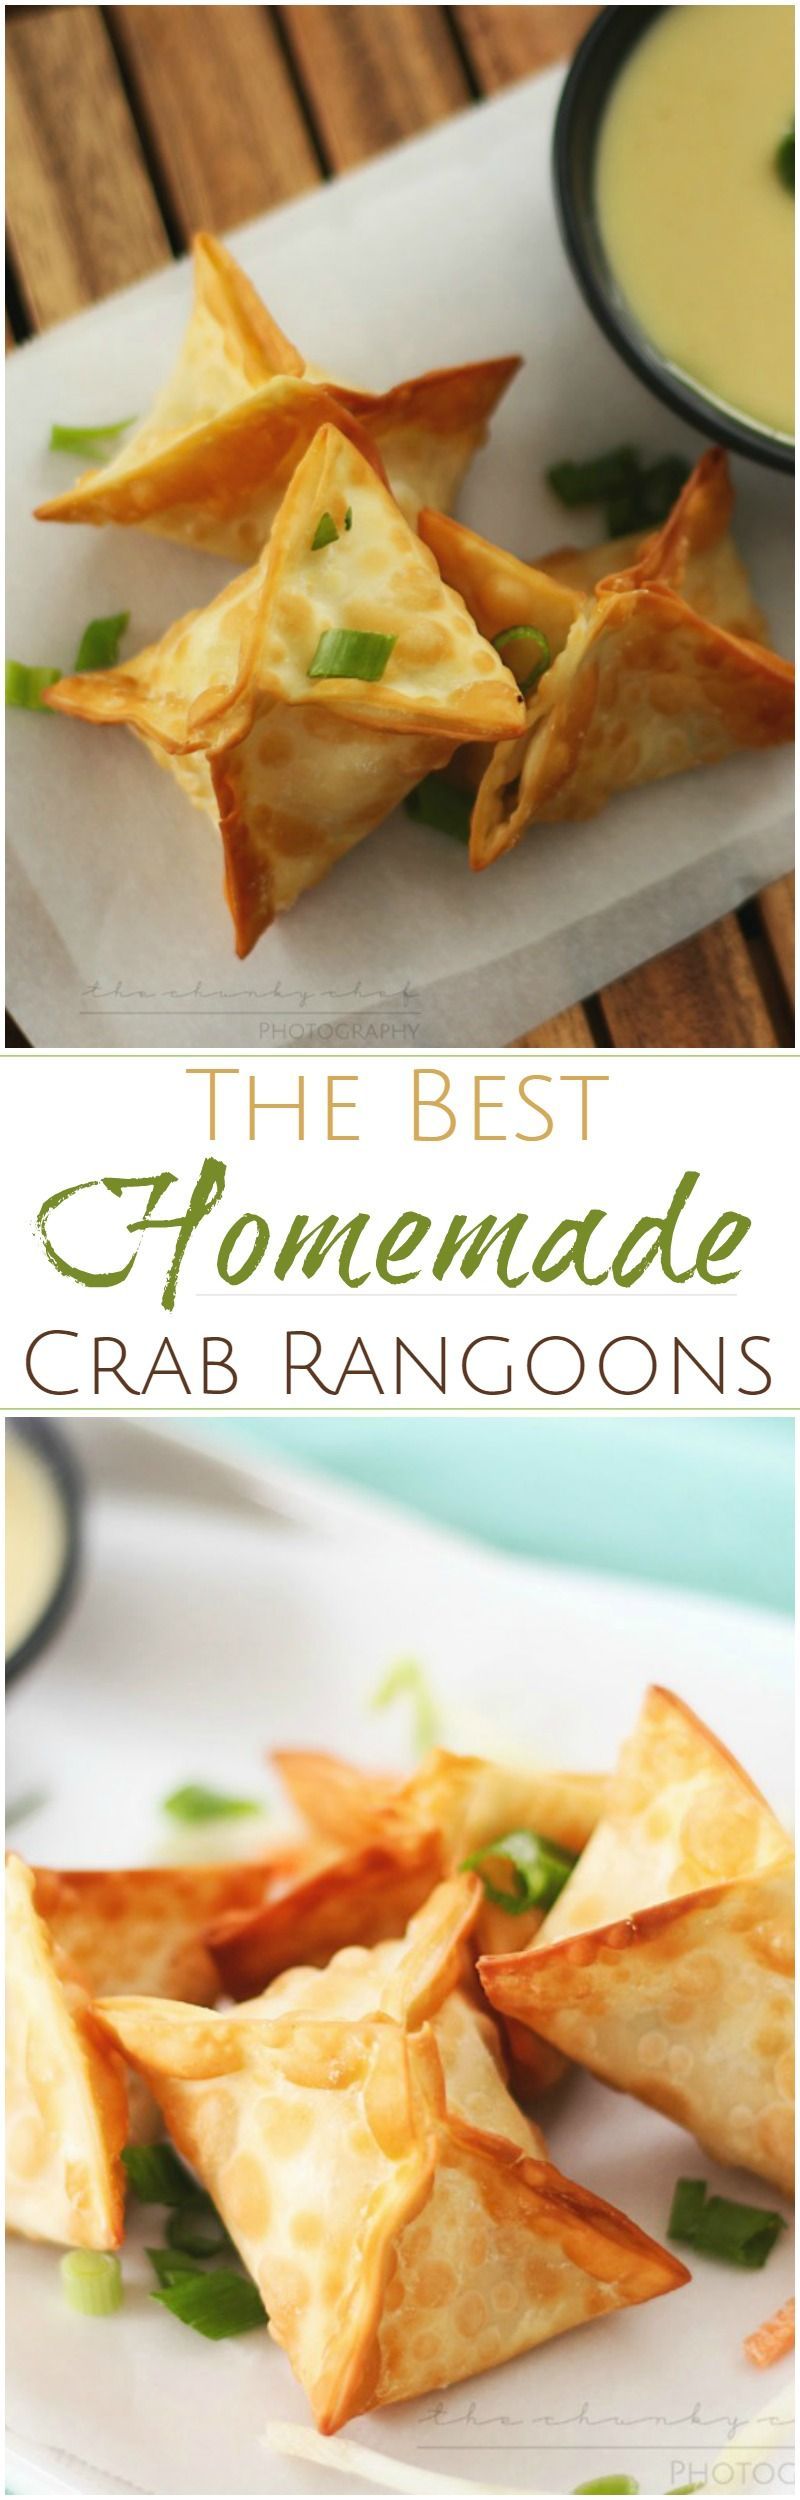 Crab Rangoons | The Chunky Chef | Like your favorite Chinese takeout appetizer… but WAY better!! These crab rangoons are simple